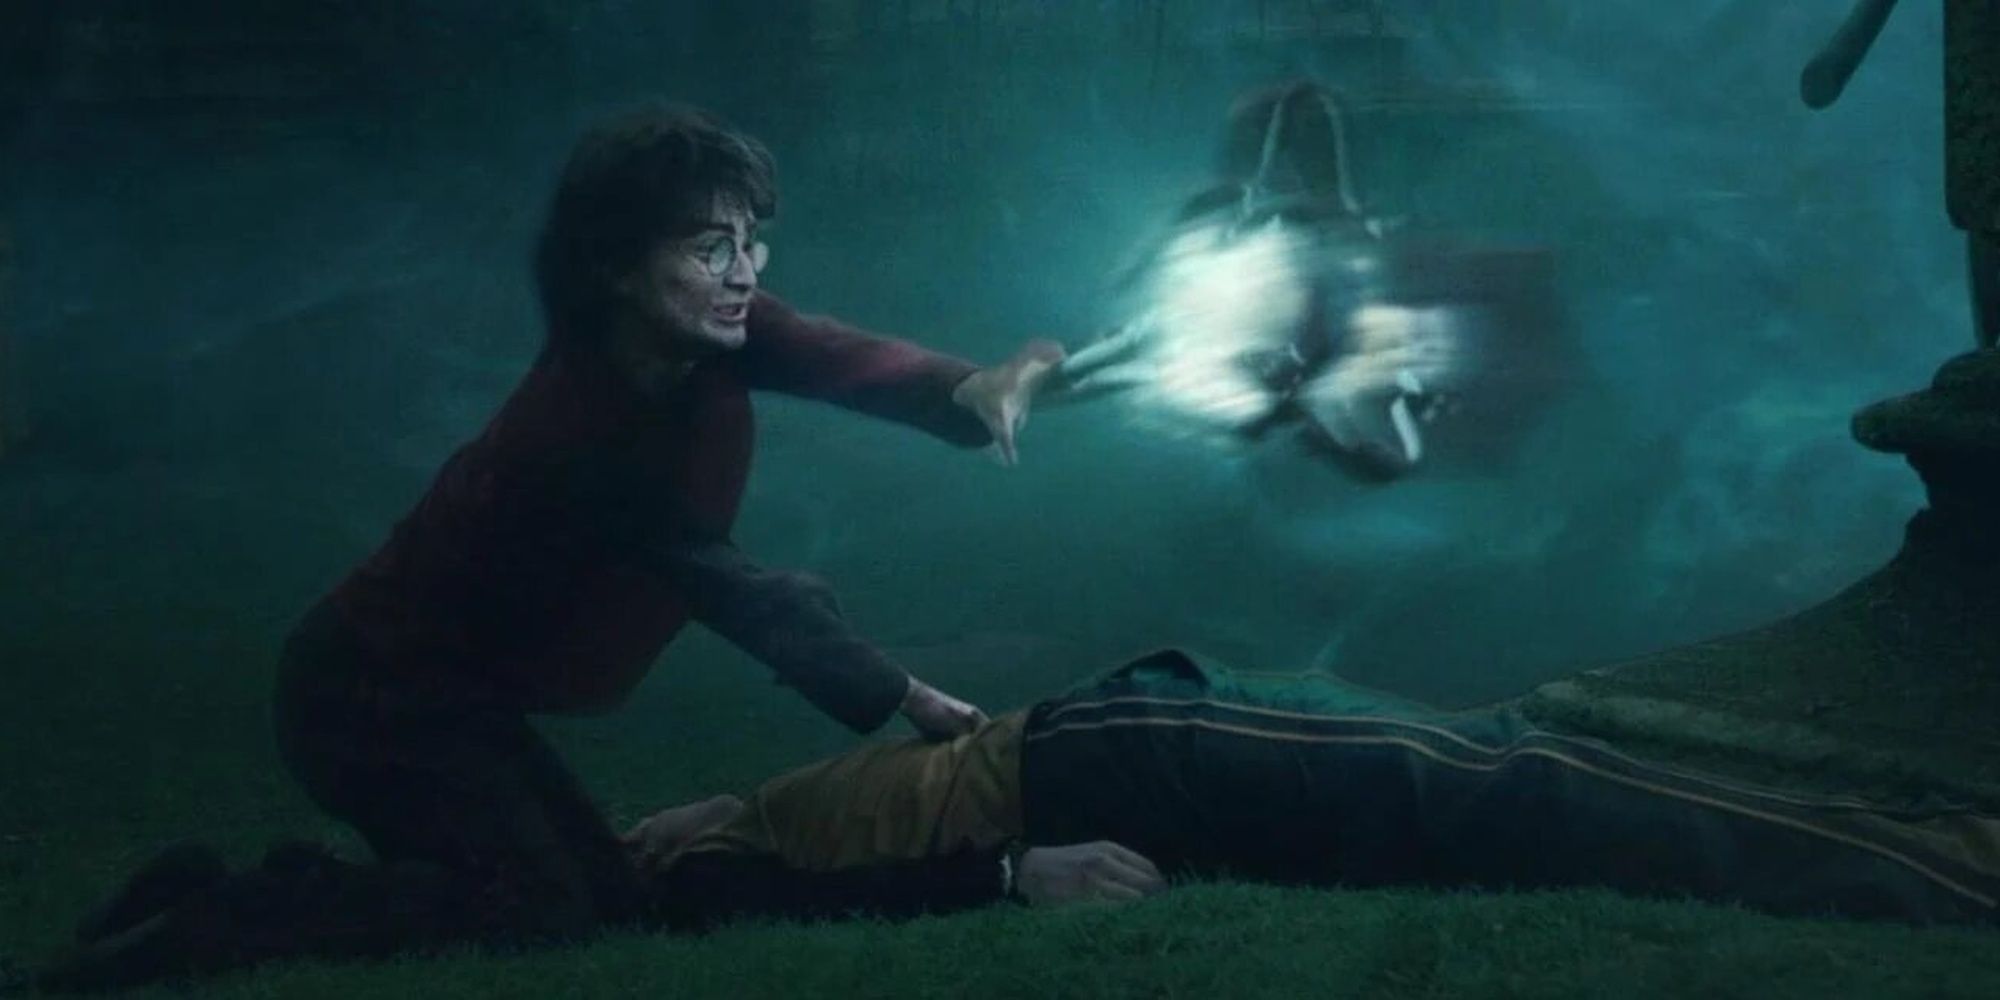 Harry Potter using the Summoning Charm to get the portkey in Goblet of Fire